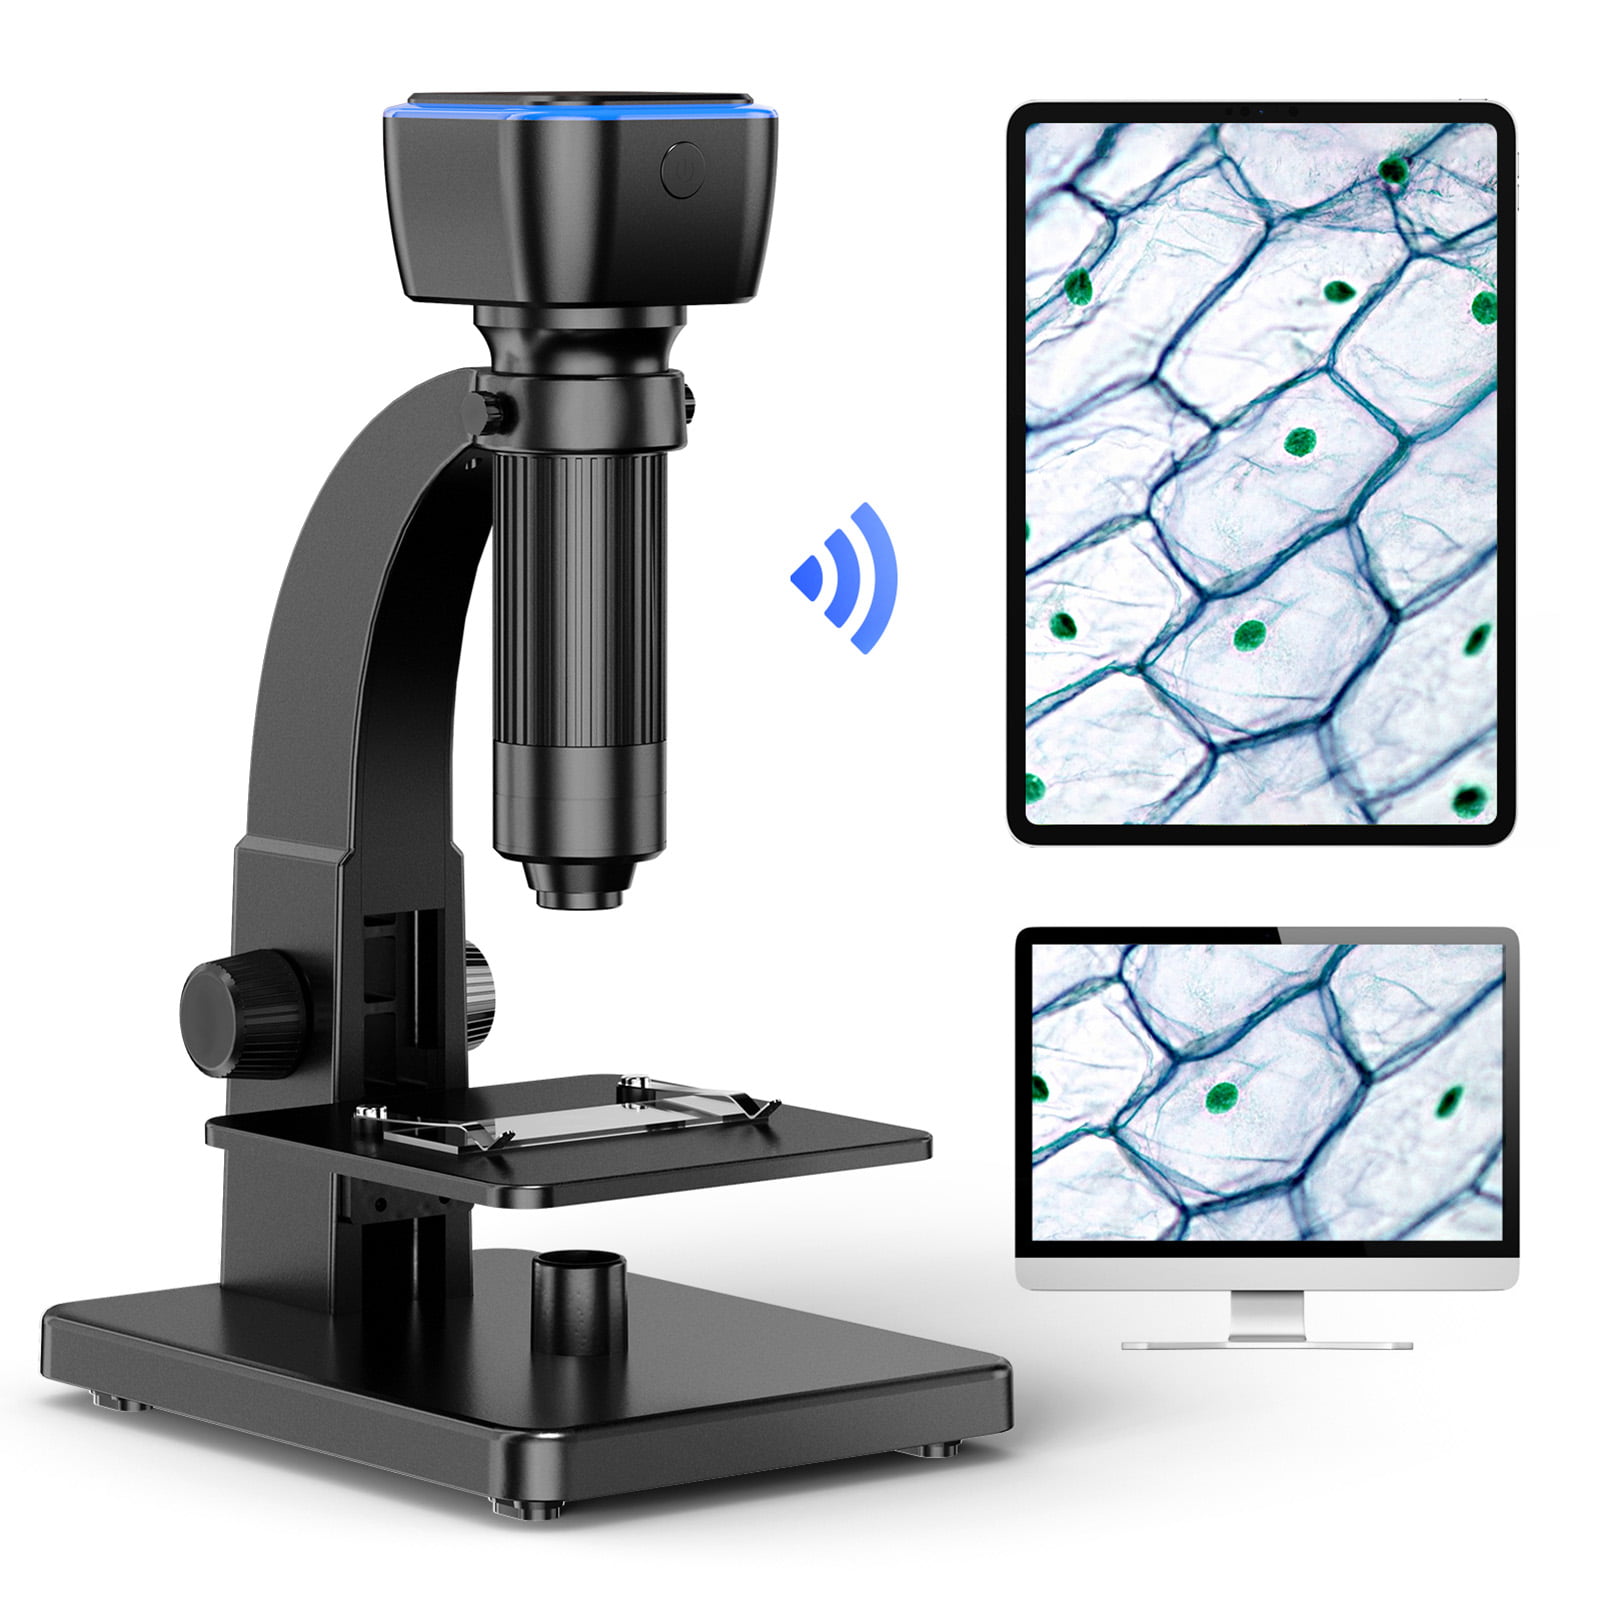 plyndringer trådløs Føderale 2000x Magnification Dual Lenses Intelligent Digital Microscope Portable USB  Rechargeable 5.0M Pixels High Clear PC & WI-FI-Connection Dual Light Source  Magnifier Supports Photographing & Vid - Walmart.com